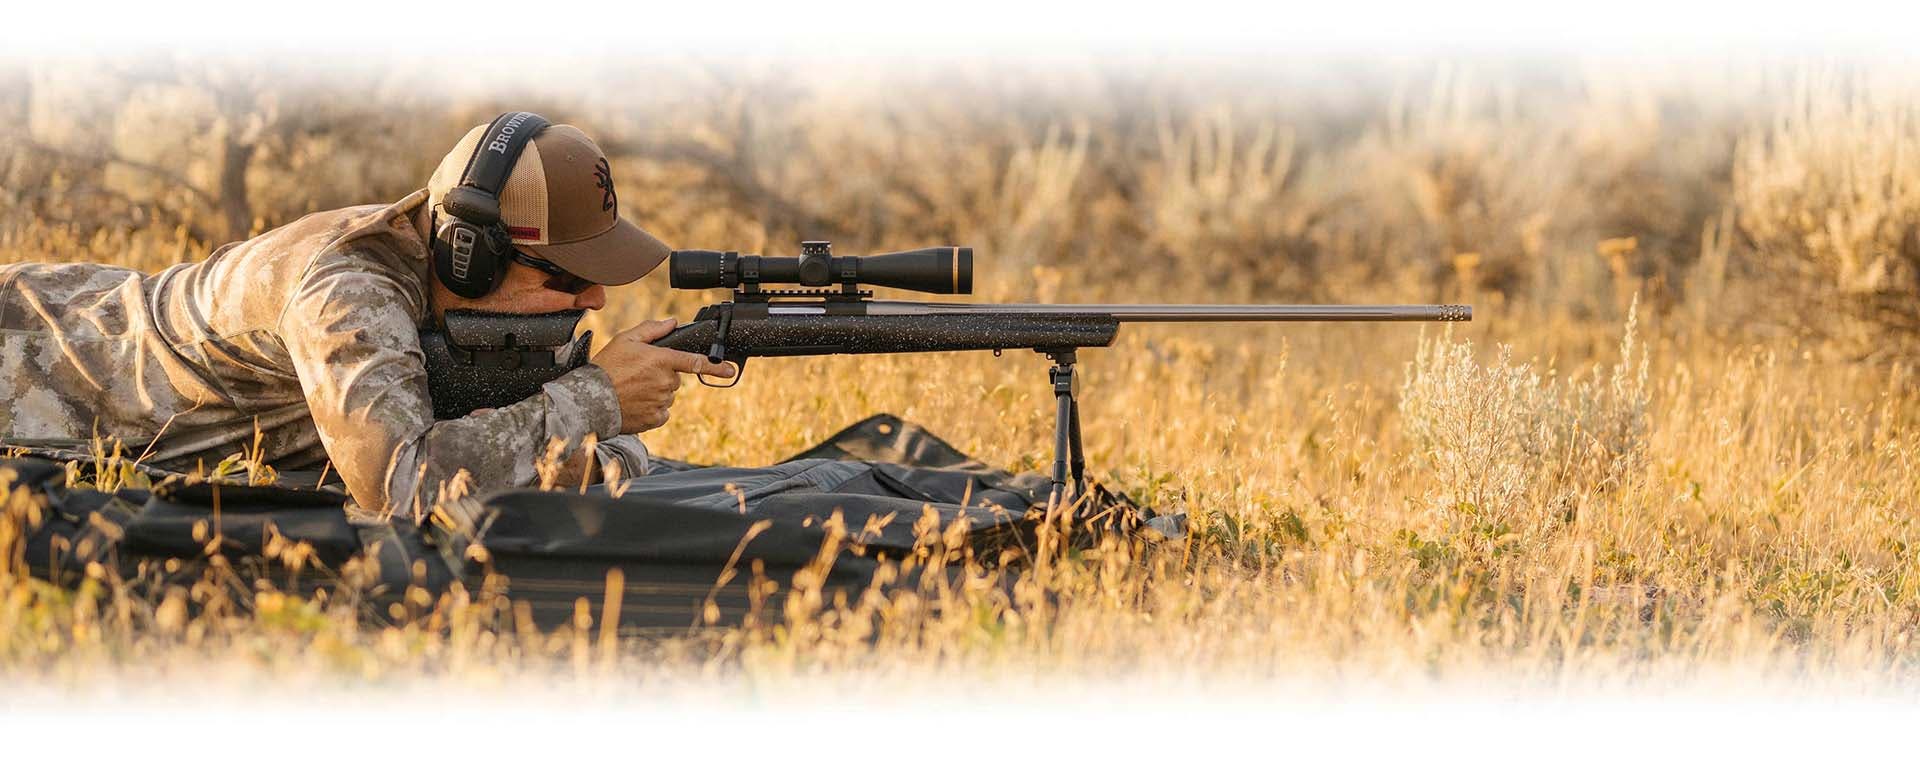 Shooting prone in the field with an X-Bolt Max Long Range bolt action rifle